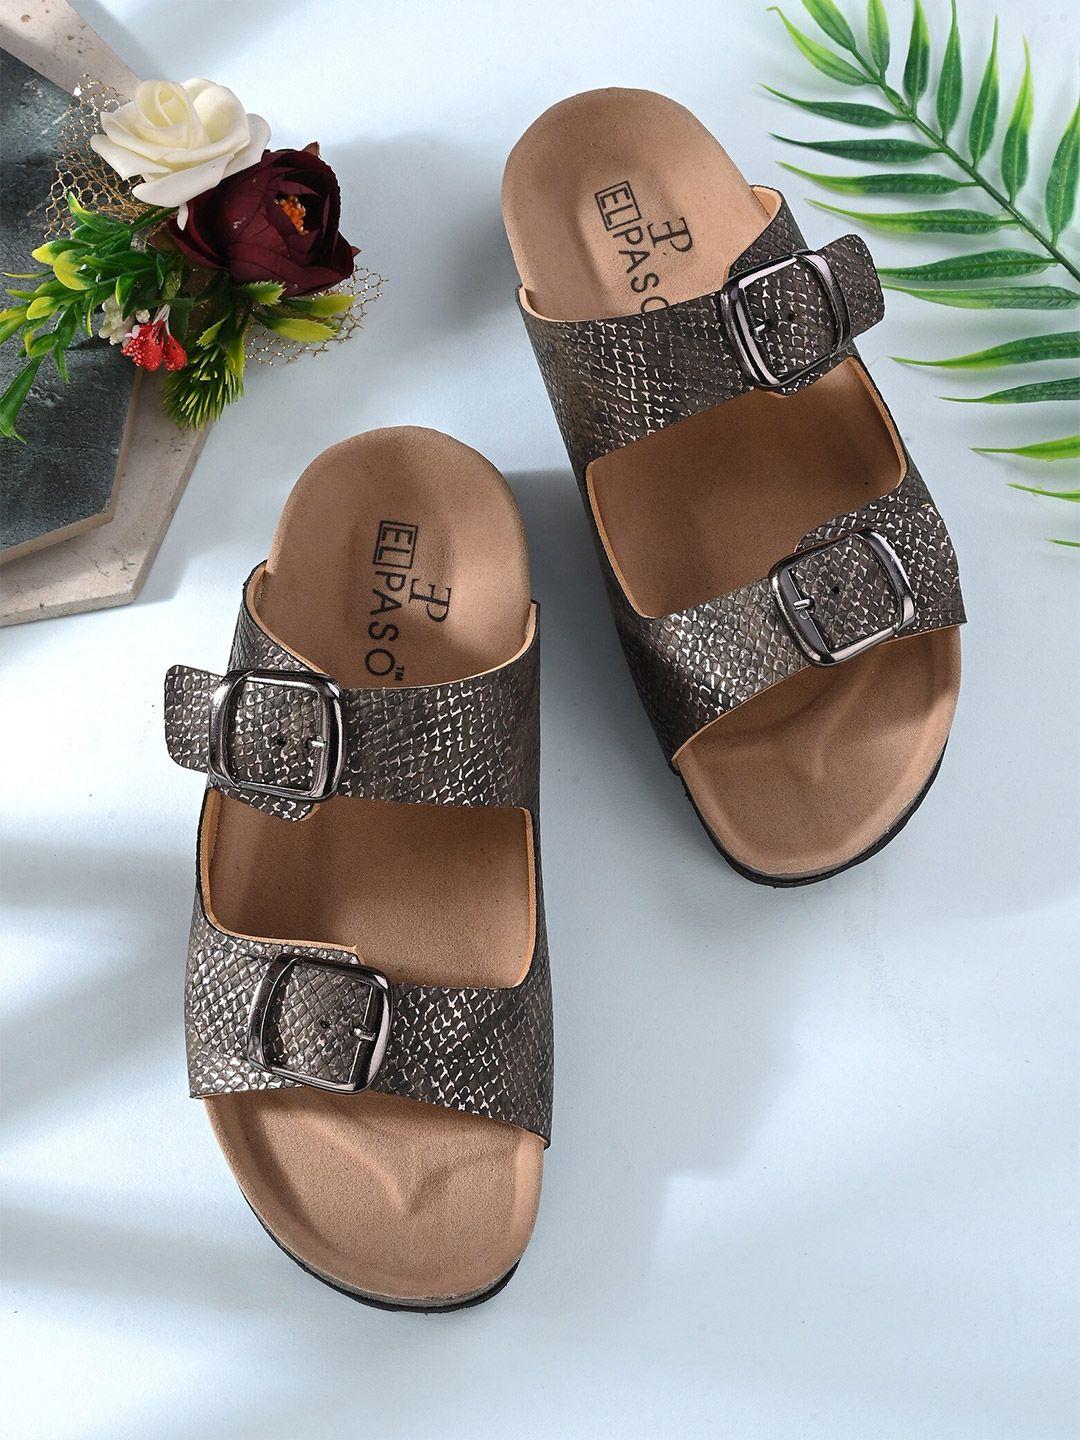 el paso women textured two strap comfort open toe flats with buckle detail